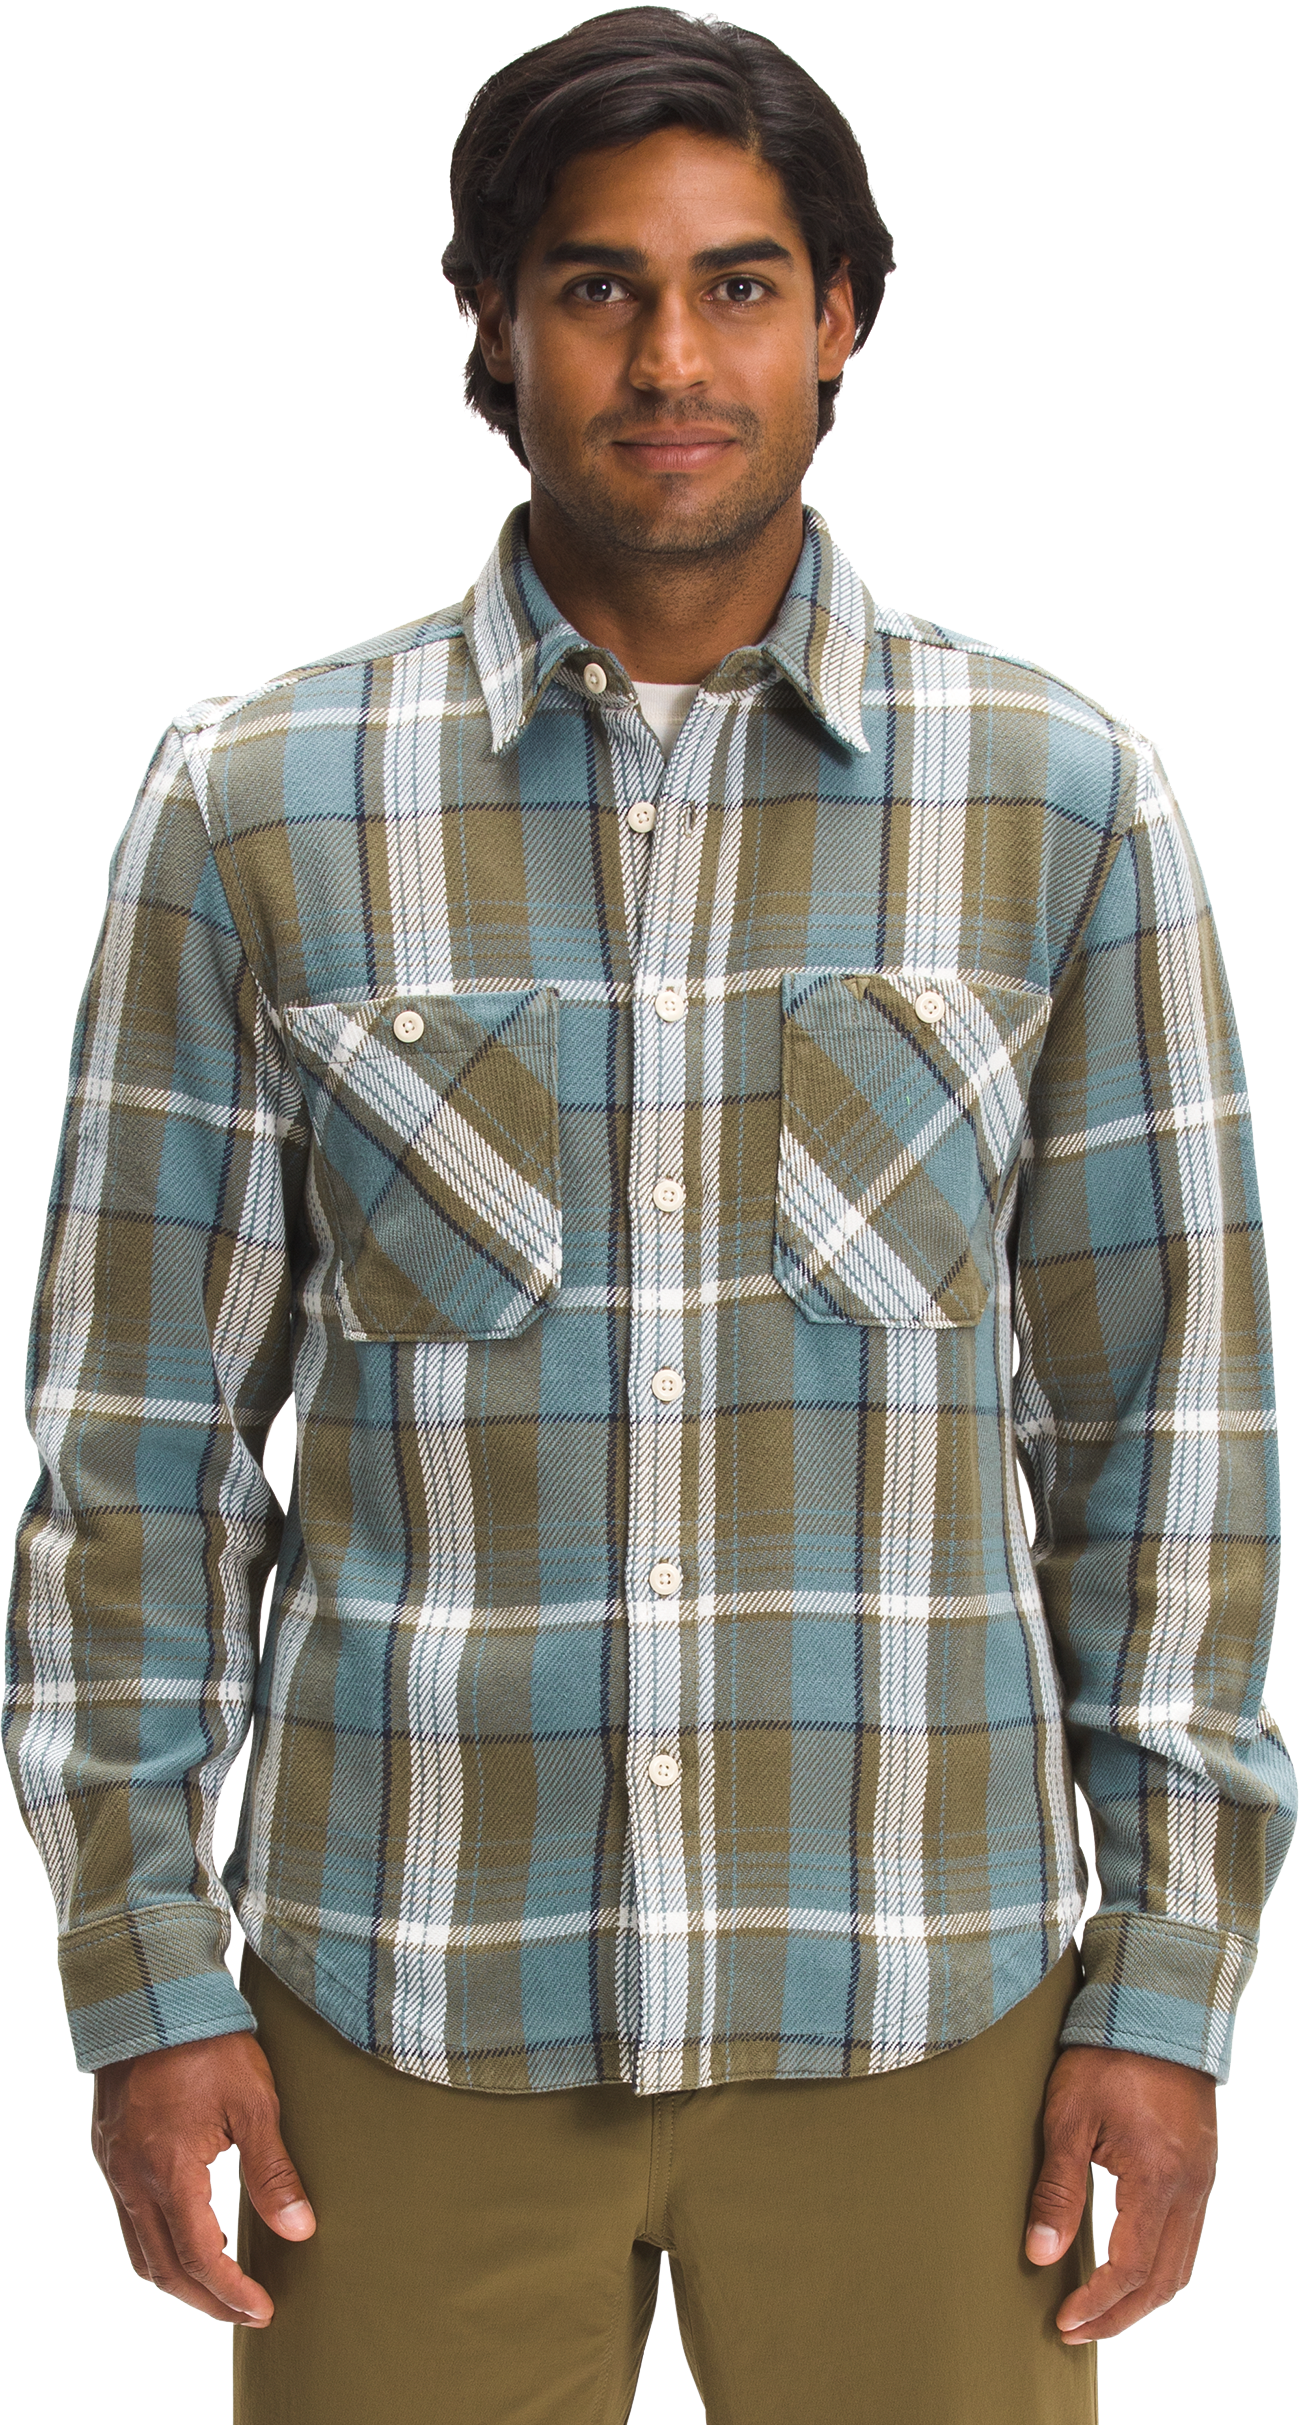 The North Face Valley Twill Flannel Long-Sleeve Shirt for Men - Goblin Blue Large HD Plaid - XL